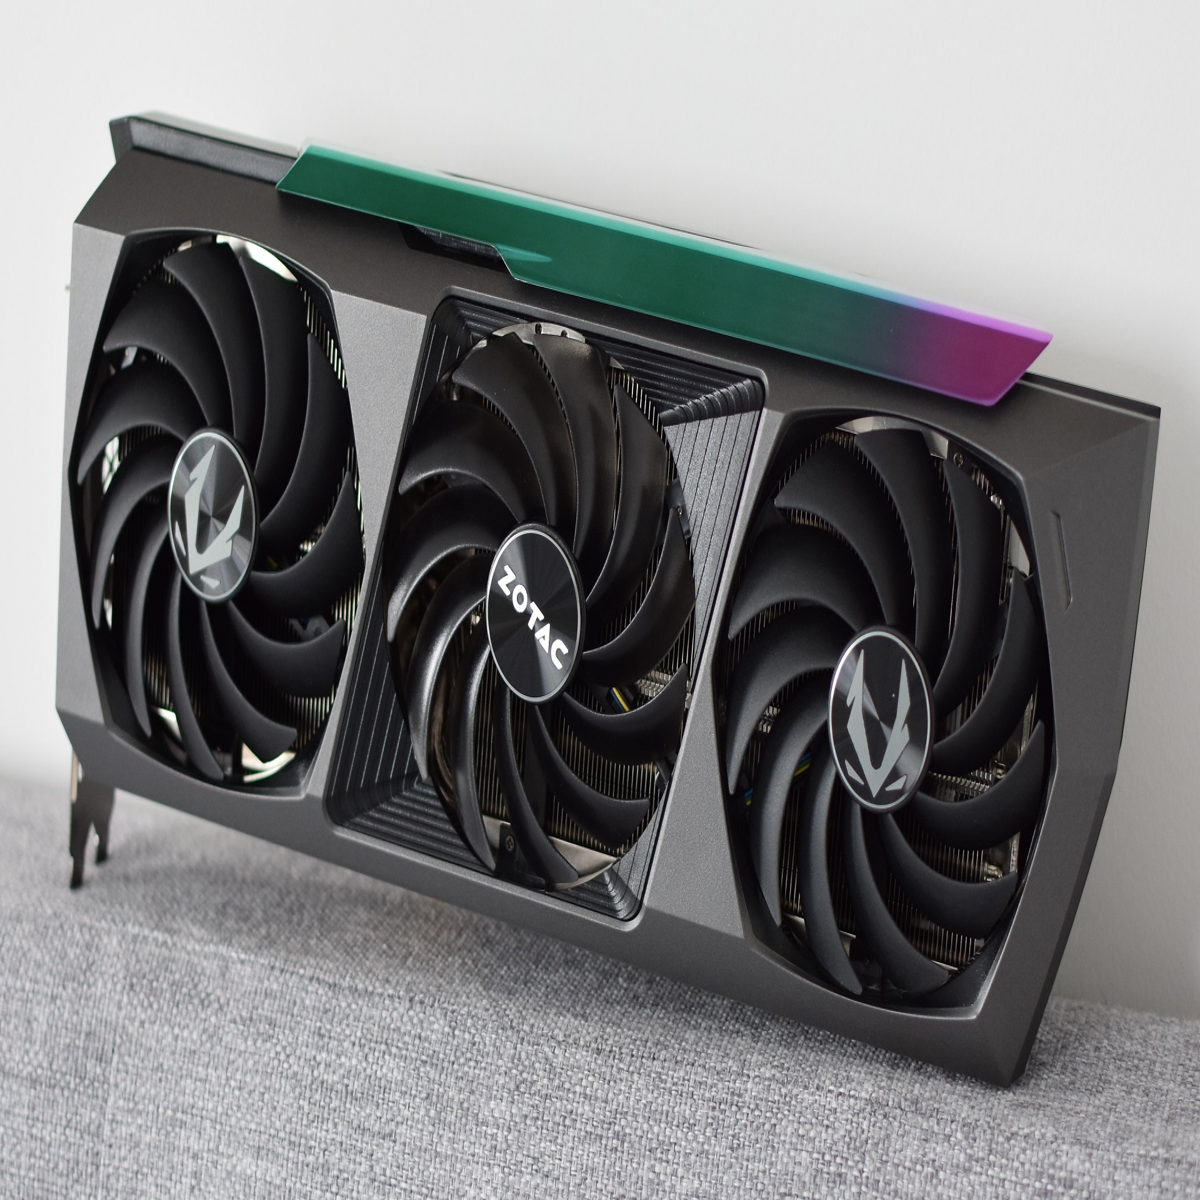 Nvidia GeForce RTX 3090 Ti review: the graphics card I want, but shouldn't